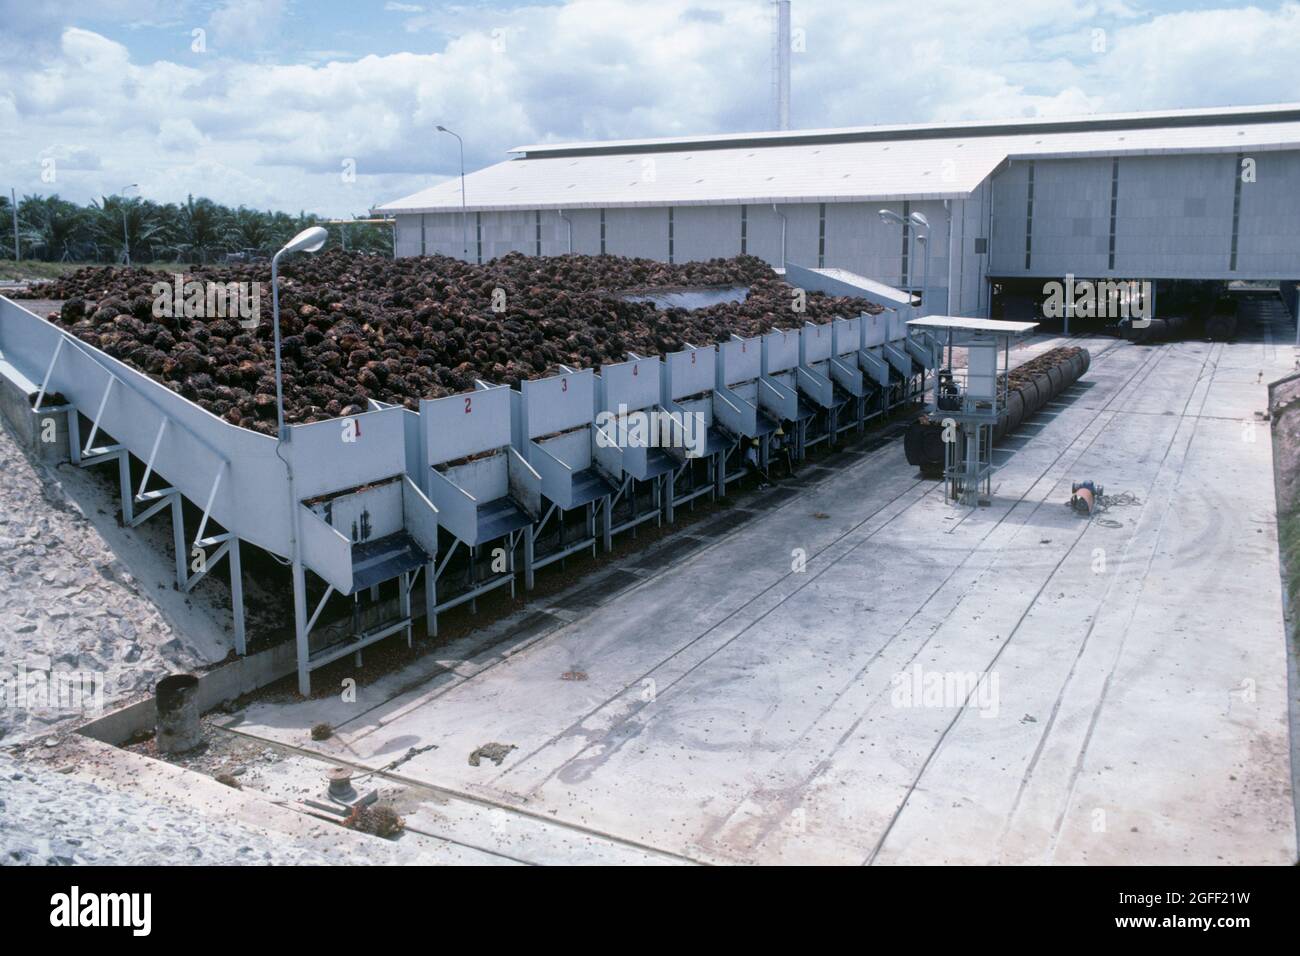 Hoppers of cut harvested fruit in oil palm (Elaeis guineensis) processing plant for oil production in southern Thailand, Stock Photo